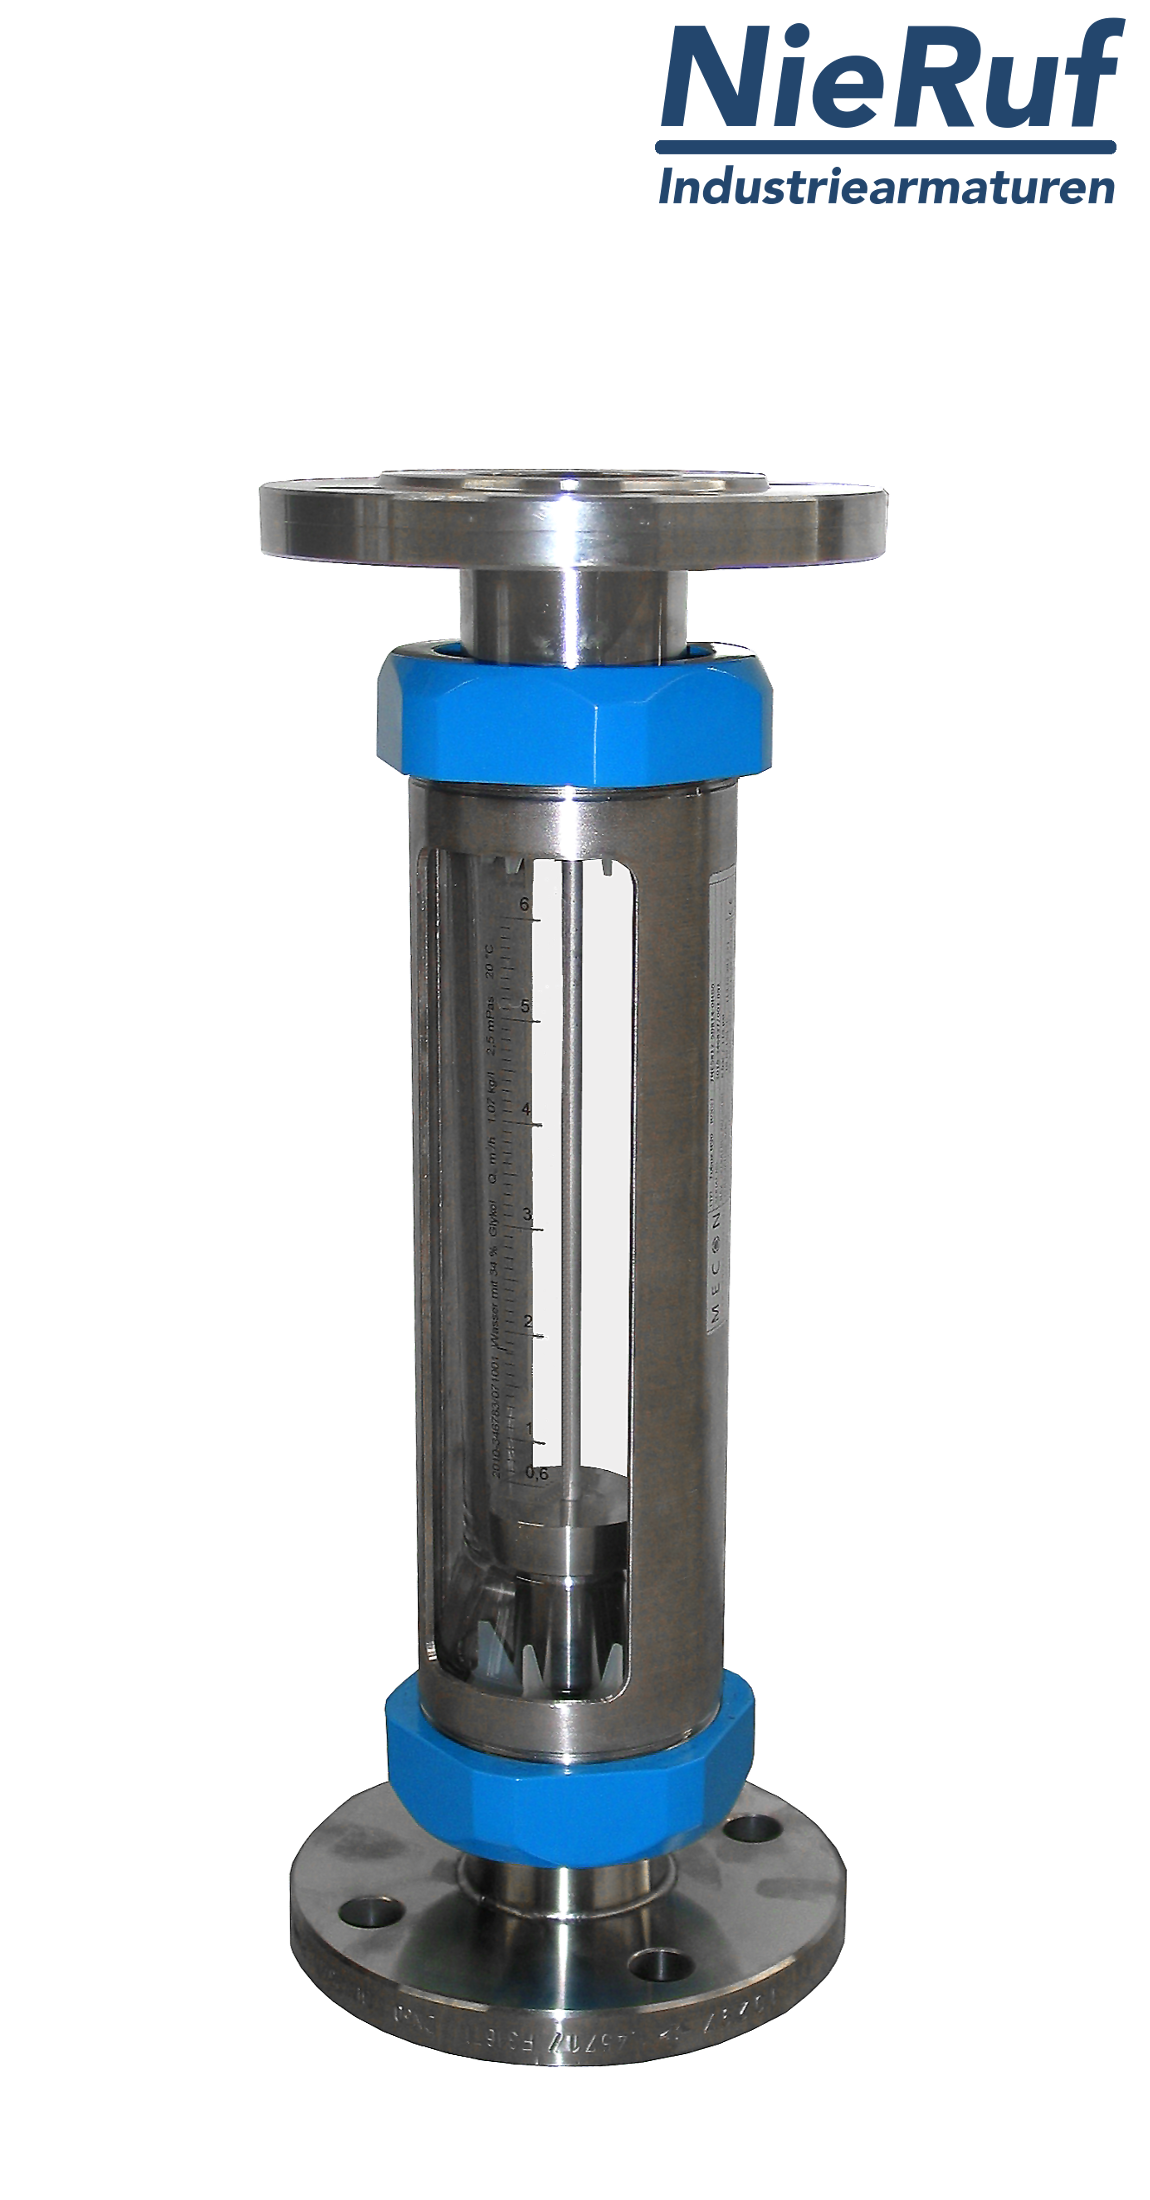 Variable area flowmeter stainless steel + borosilicate flange DN40 650.0 - 6500 l/h water FKM